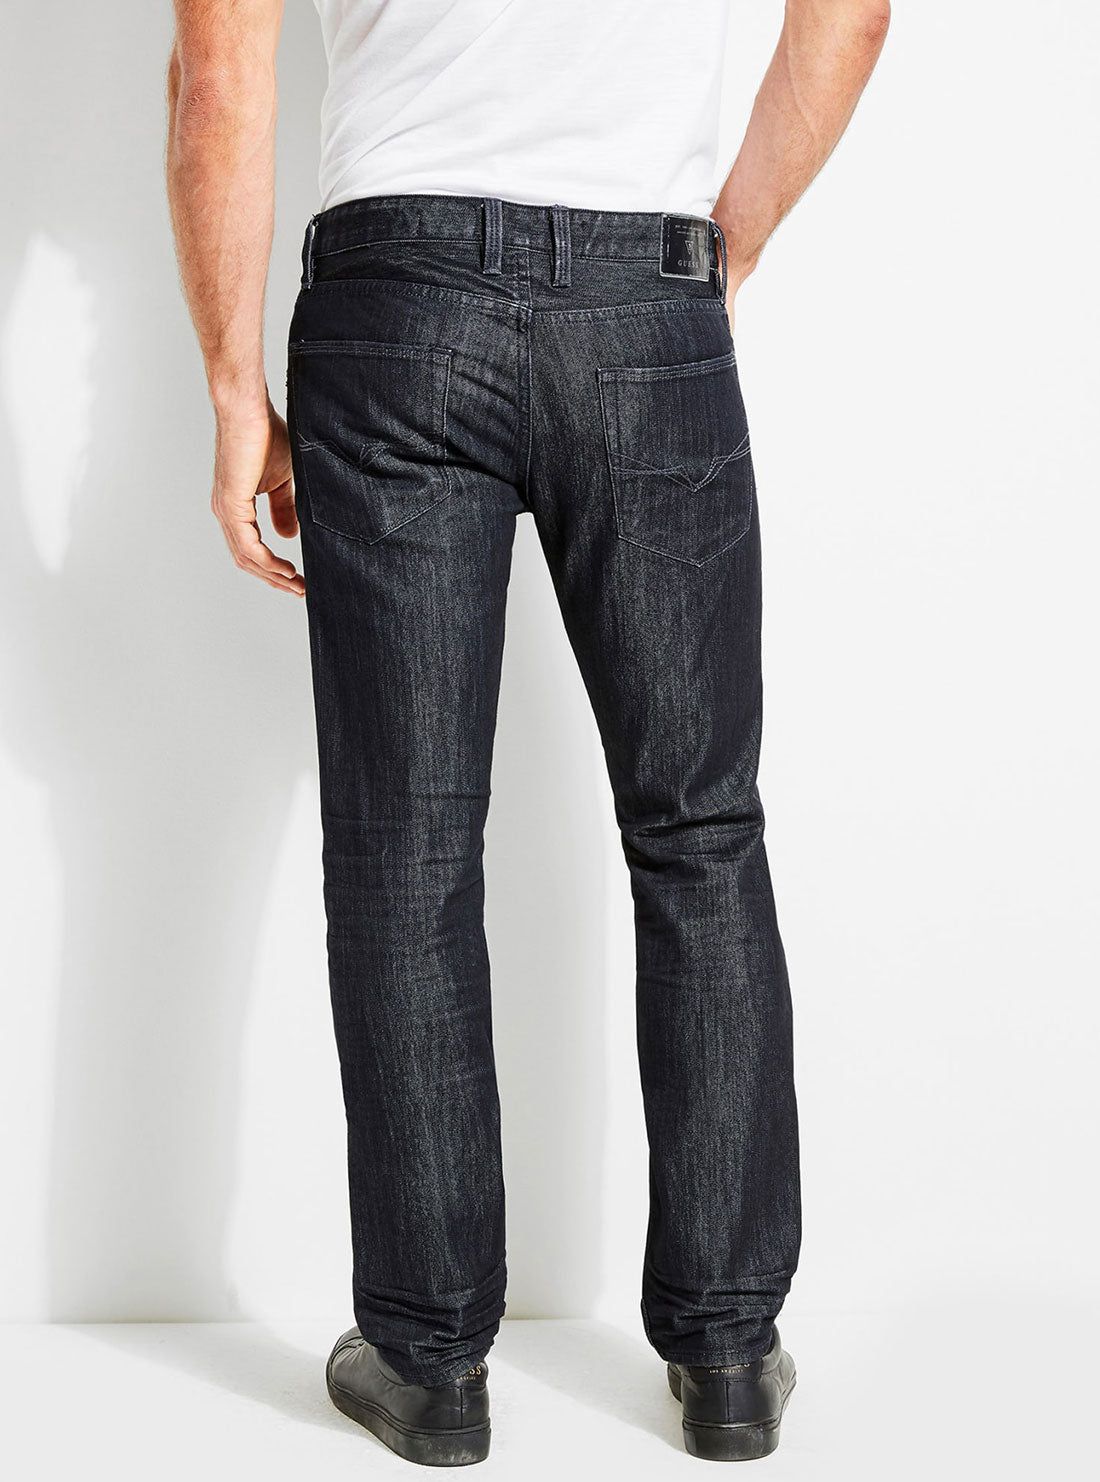 GUESS Mens Low-Rise Slim Straight Denim Jeans in Smokescreen Wash MB3AS121OD0 Back View